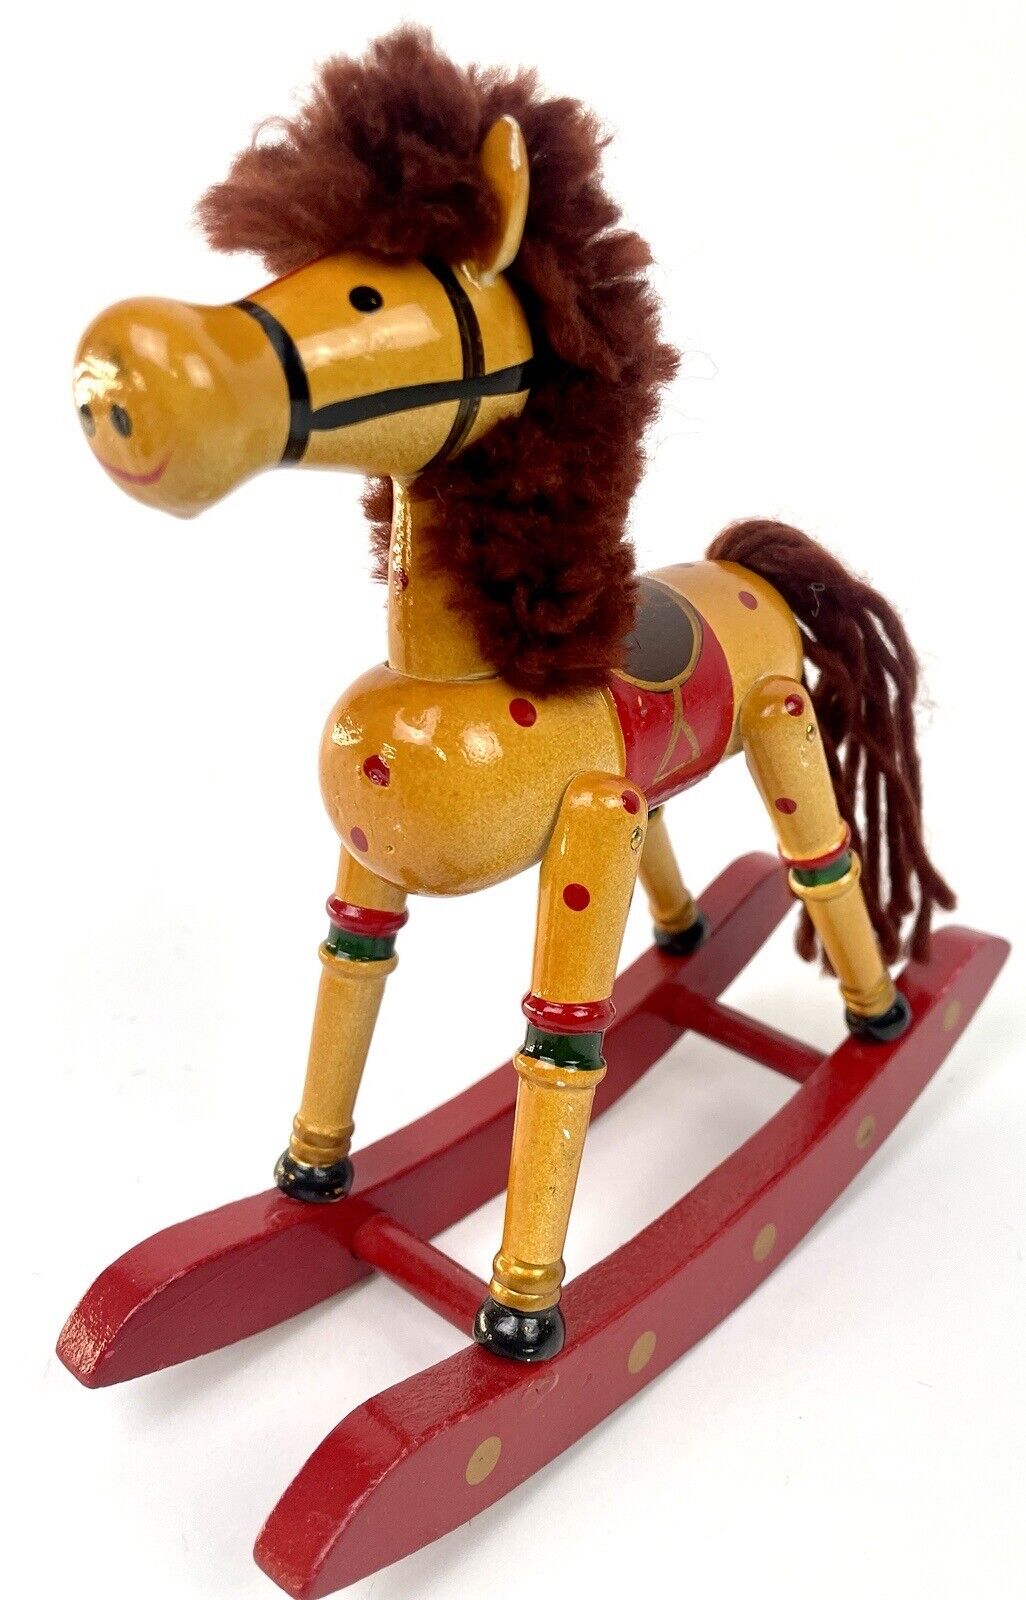 Vintage Wooden Tabletop Rocking Horse | Taiwan | Yarn Hair 7.5” Lucie Stable Imp